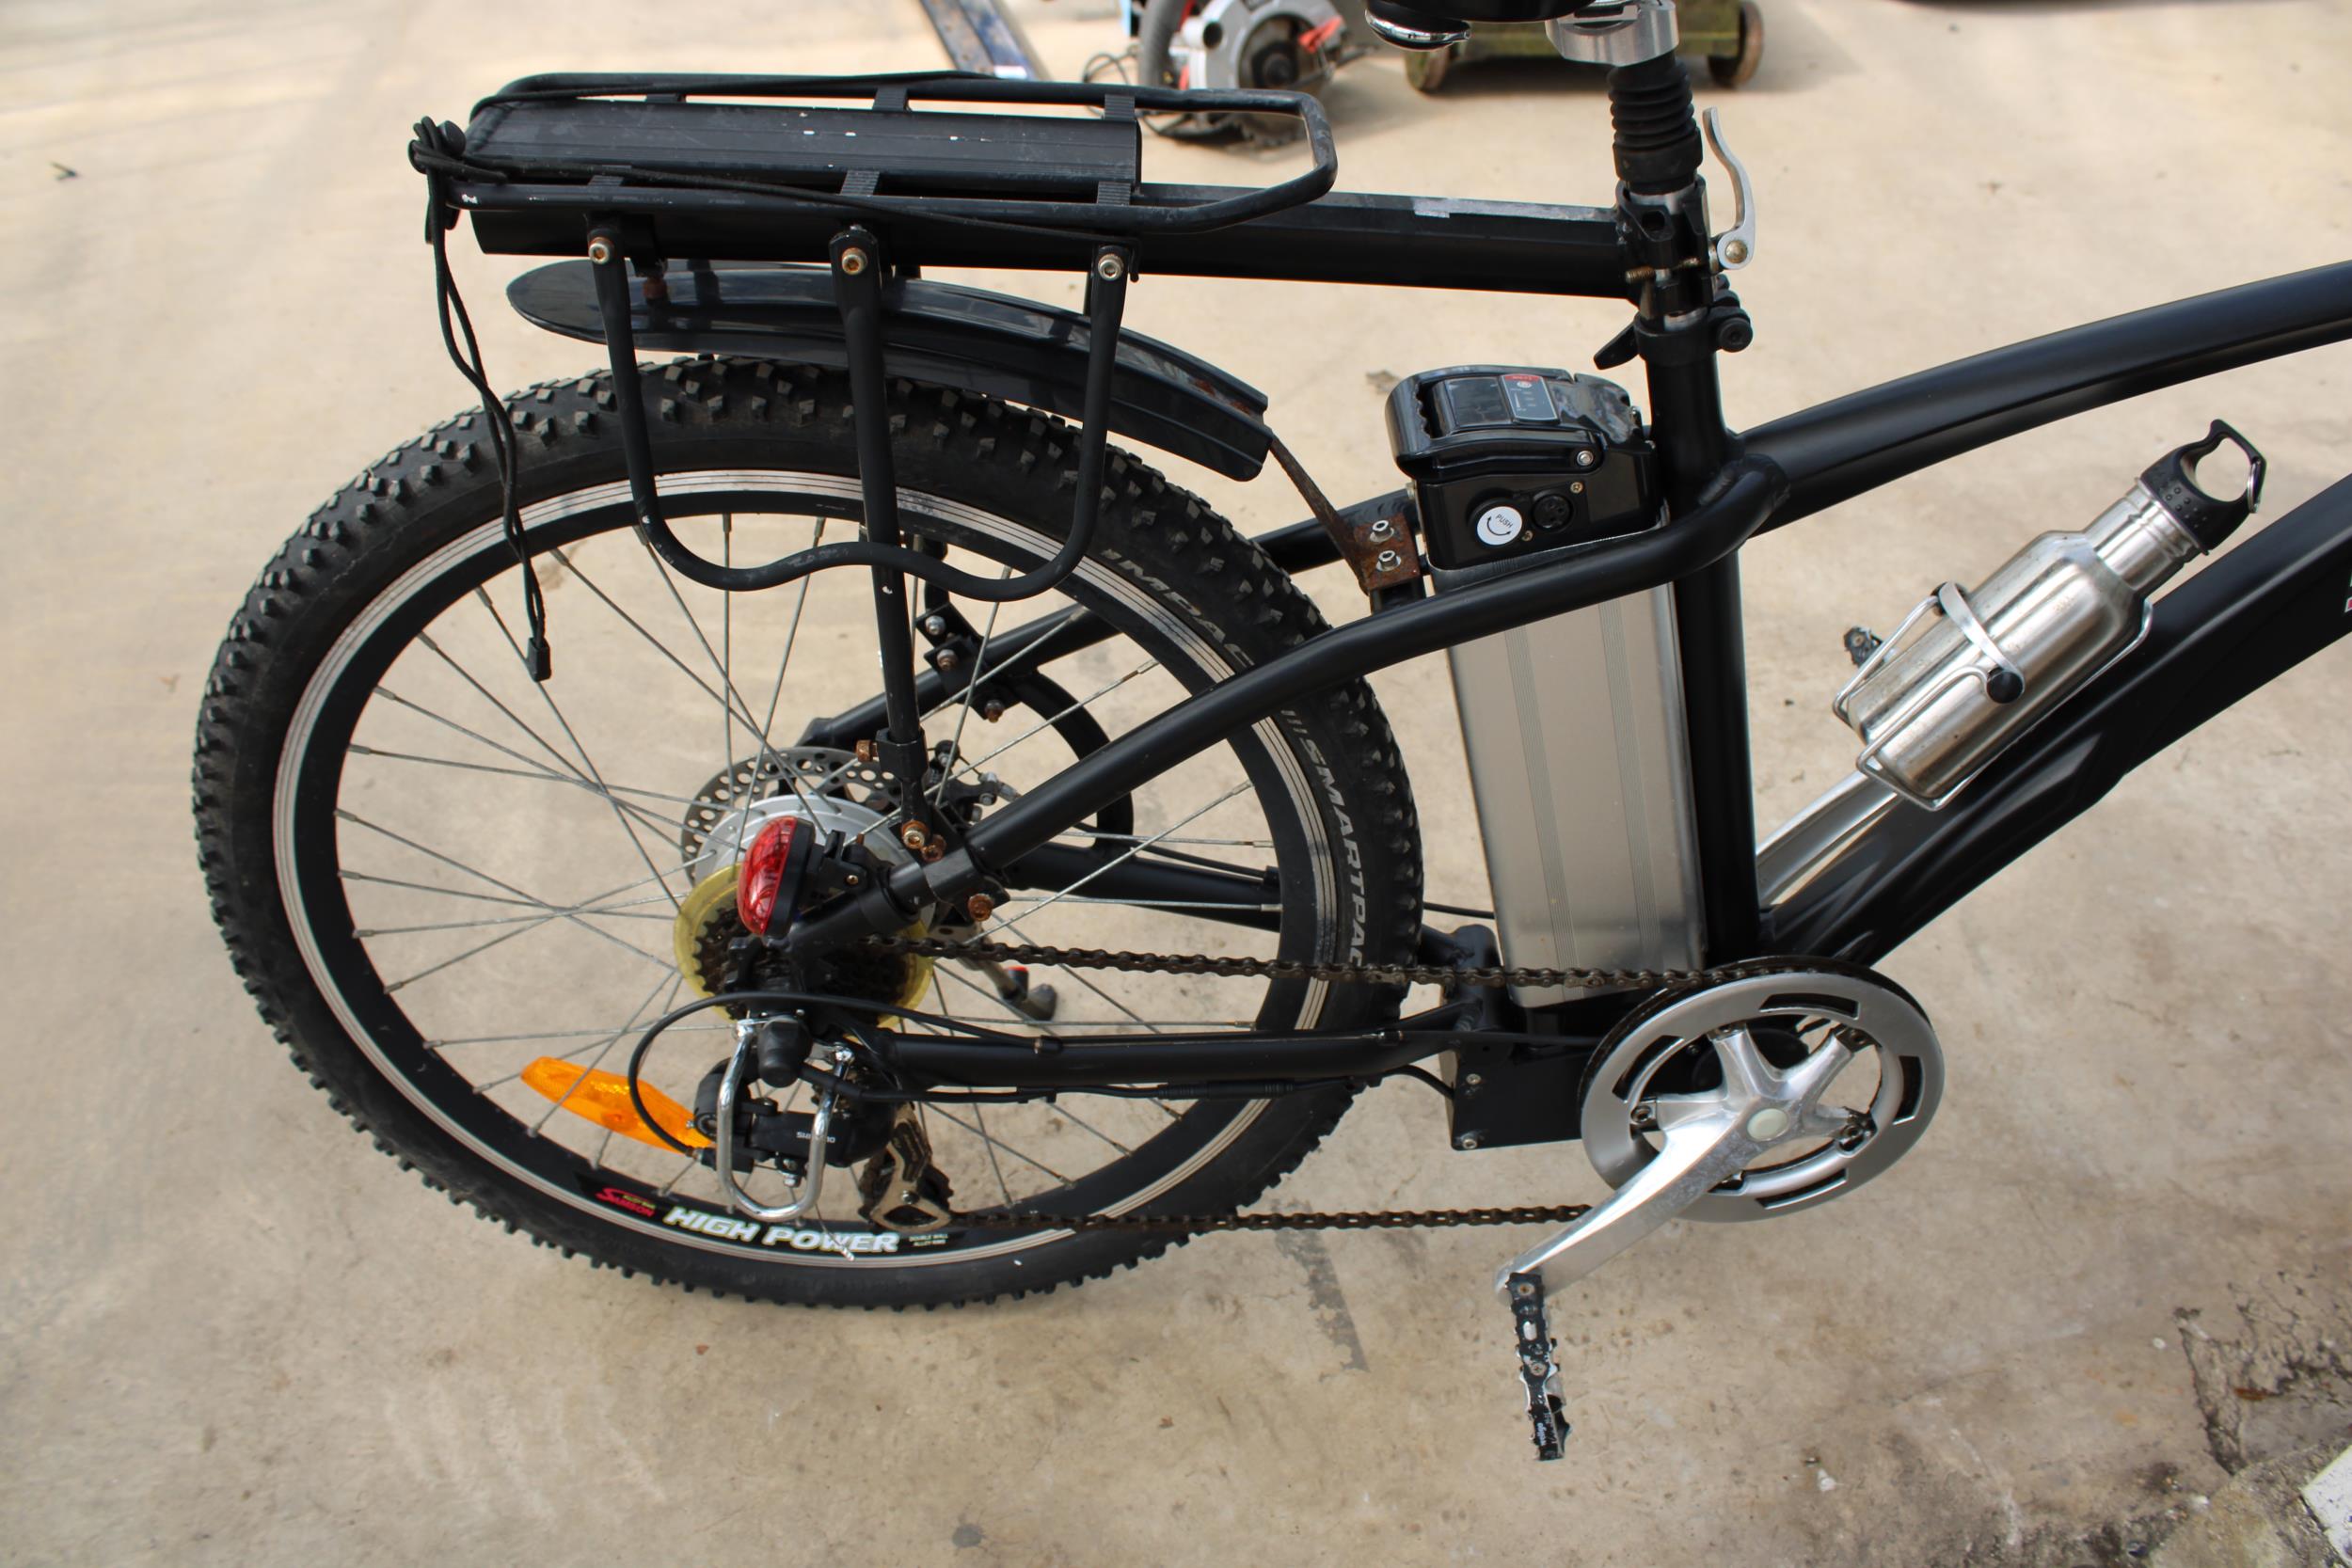 A DR.BIKE ELECTRIC ASSISTED GENTS MOUNTAIN BIKE WITH FRONT SUSPENSION, DISC BRAKES AND 6 SPEED - Image 7 of 7